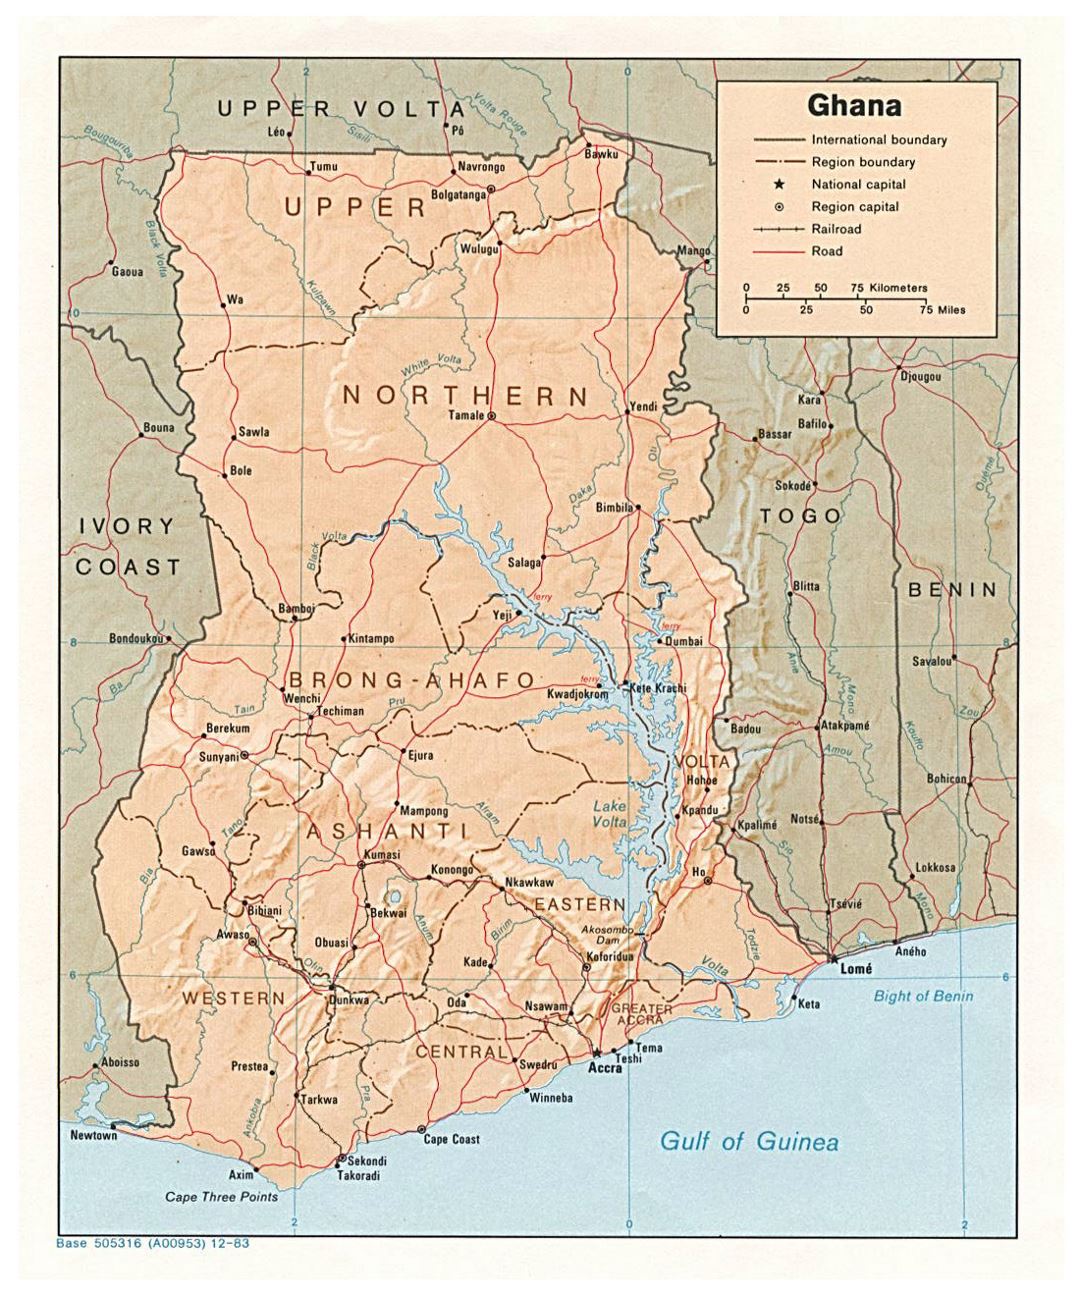 Detailed political and administrative map of Ghana with relief, roads, railroads and major cities - 1983